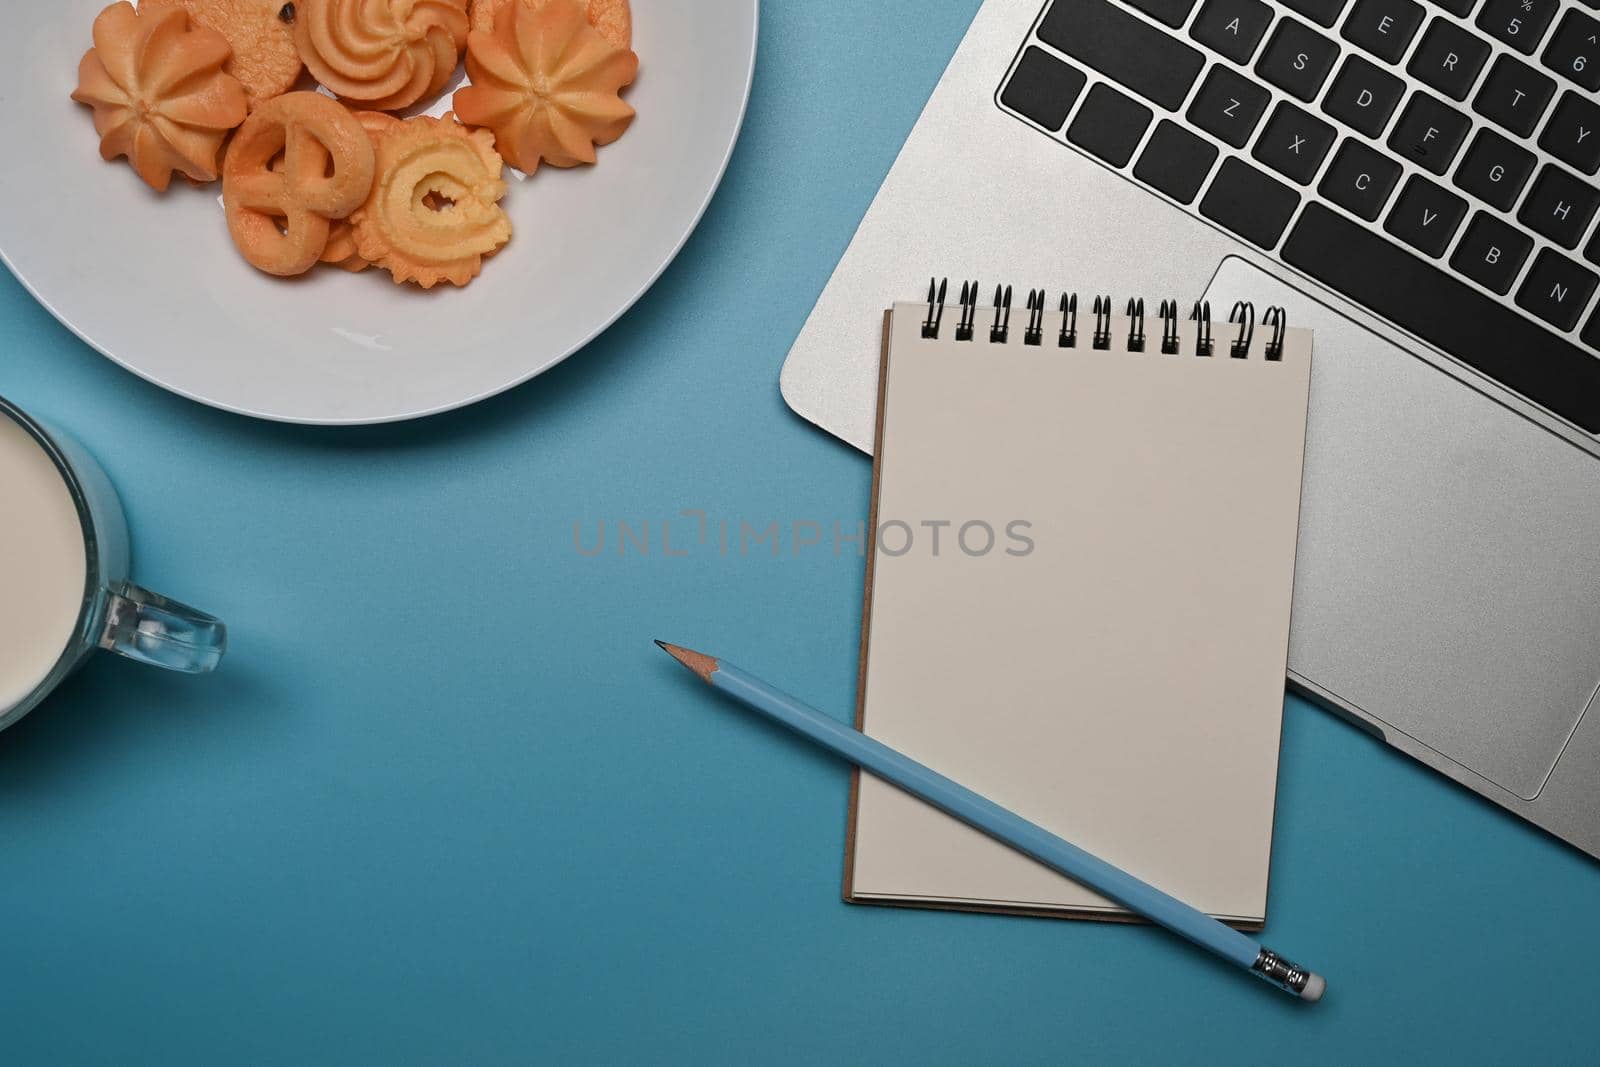 Plate with Danish butter cookies, fresh milk, notebook and laptop on blue background.